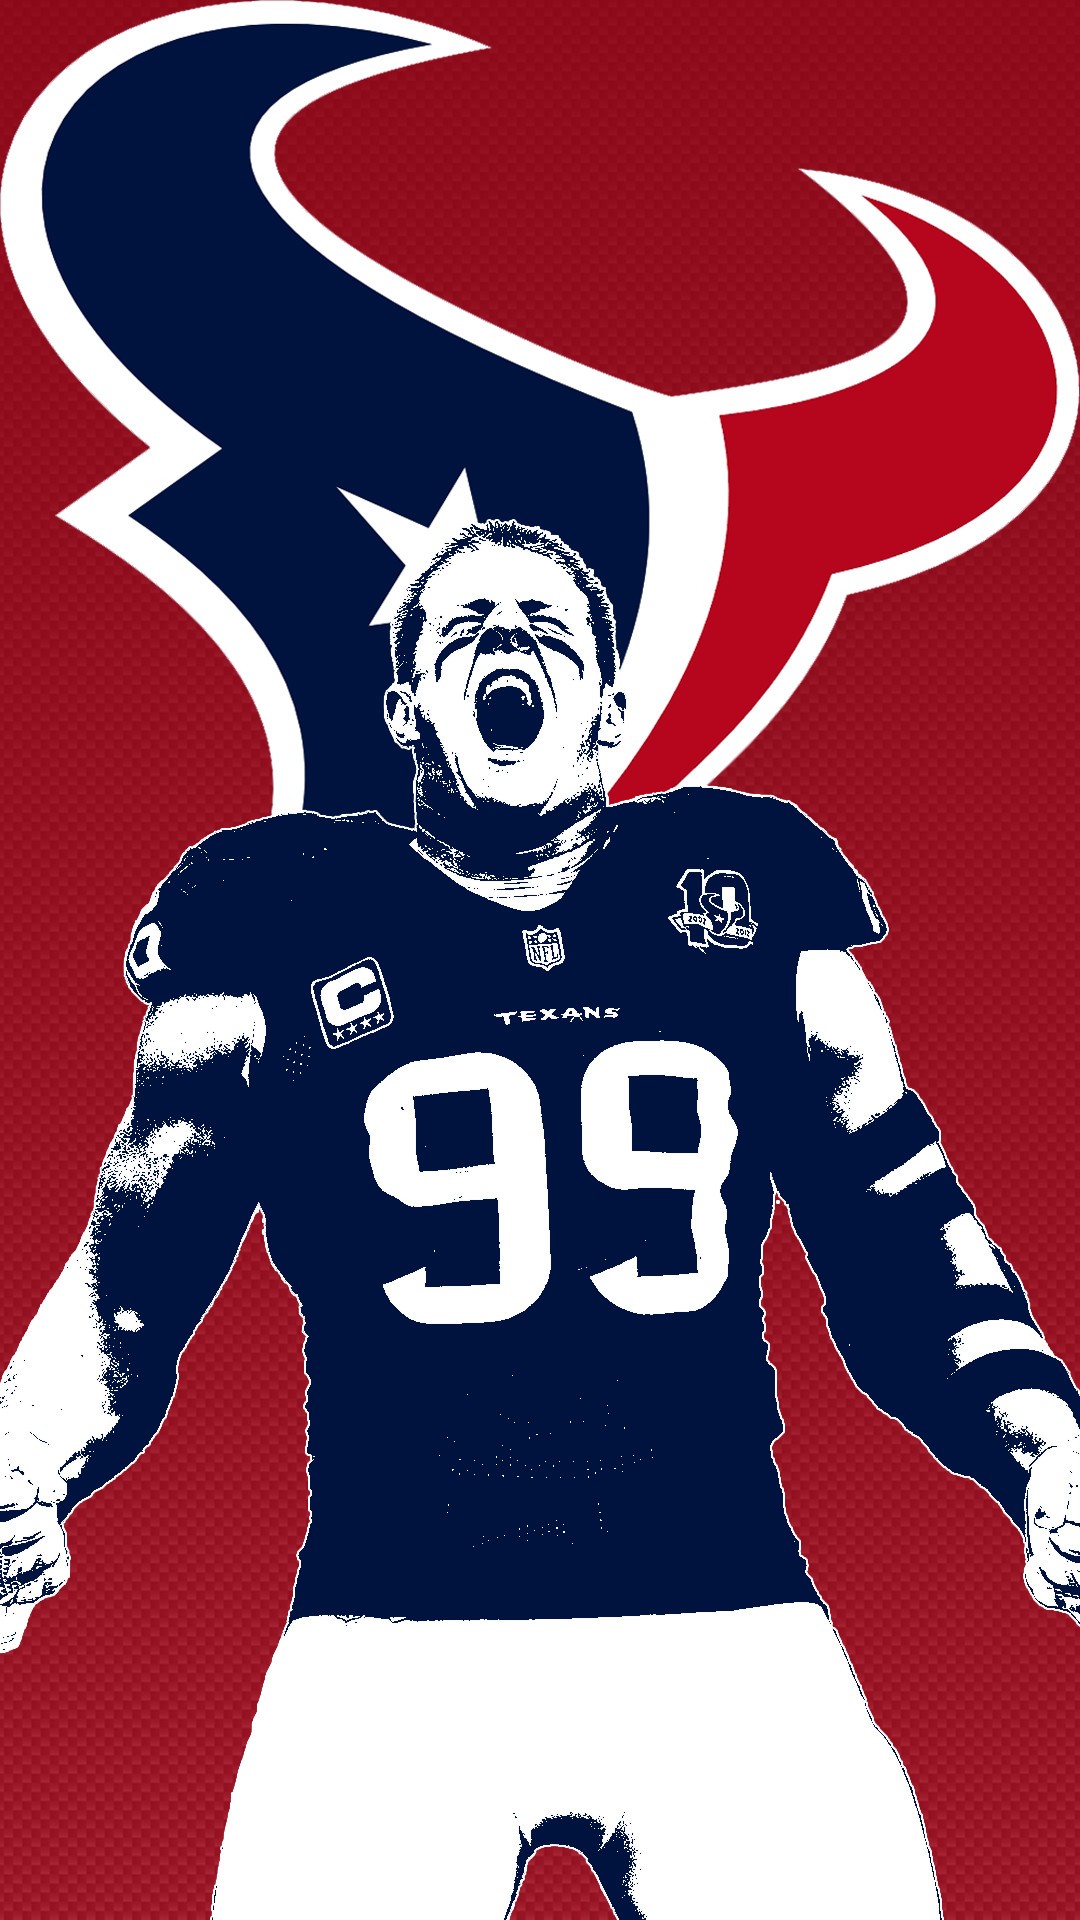 JJ Watt iPhone Wallpaper Design With high-resolution 1080X1920 pixel. Download and set as wallpaper for Apple iPhone X, XS Max, XR, 8, 7, 6, SE, iPad, Android